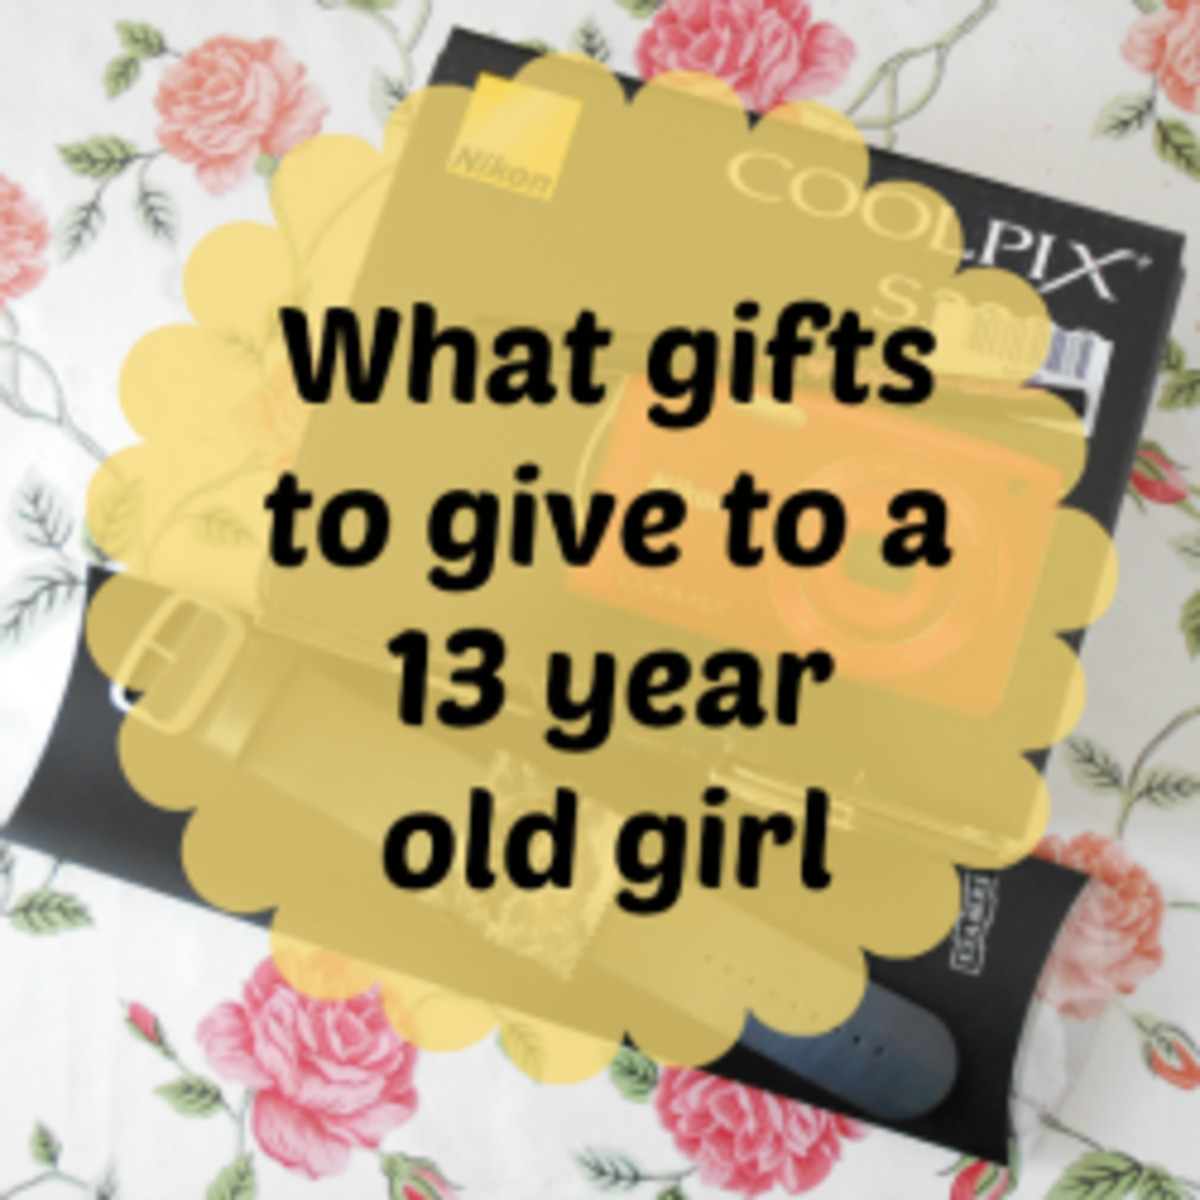 Gift Ideas For 13 Year Old Girls
 Best Gifts for a 13 Year Old Girl Lots of Ideas